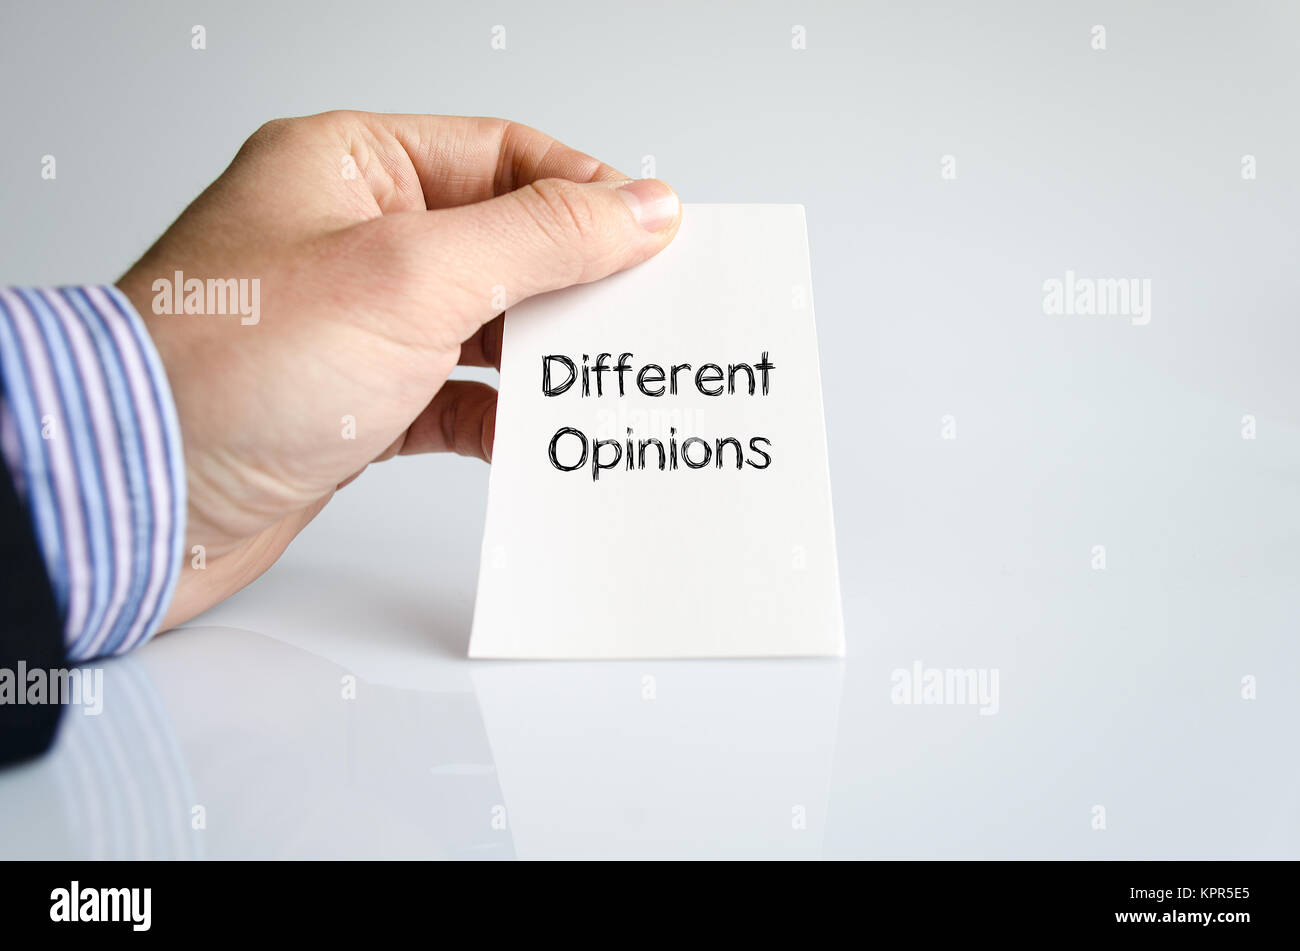 Different opinions text concept Stock Photo